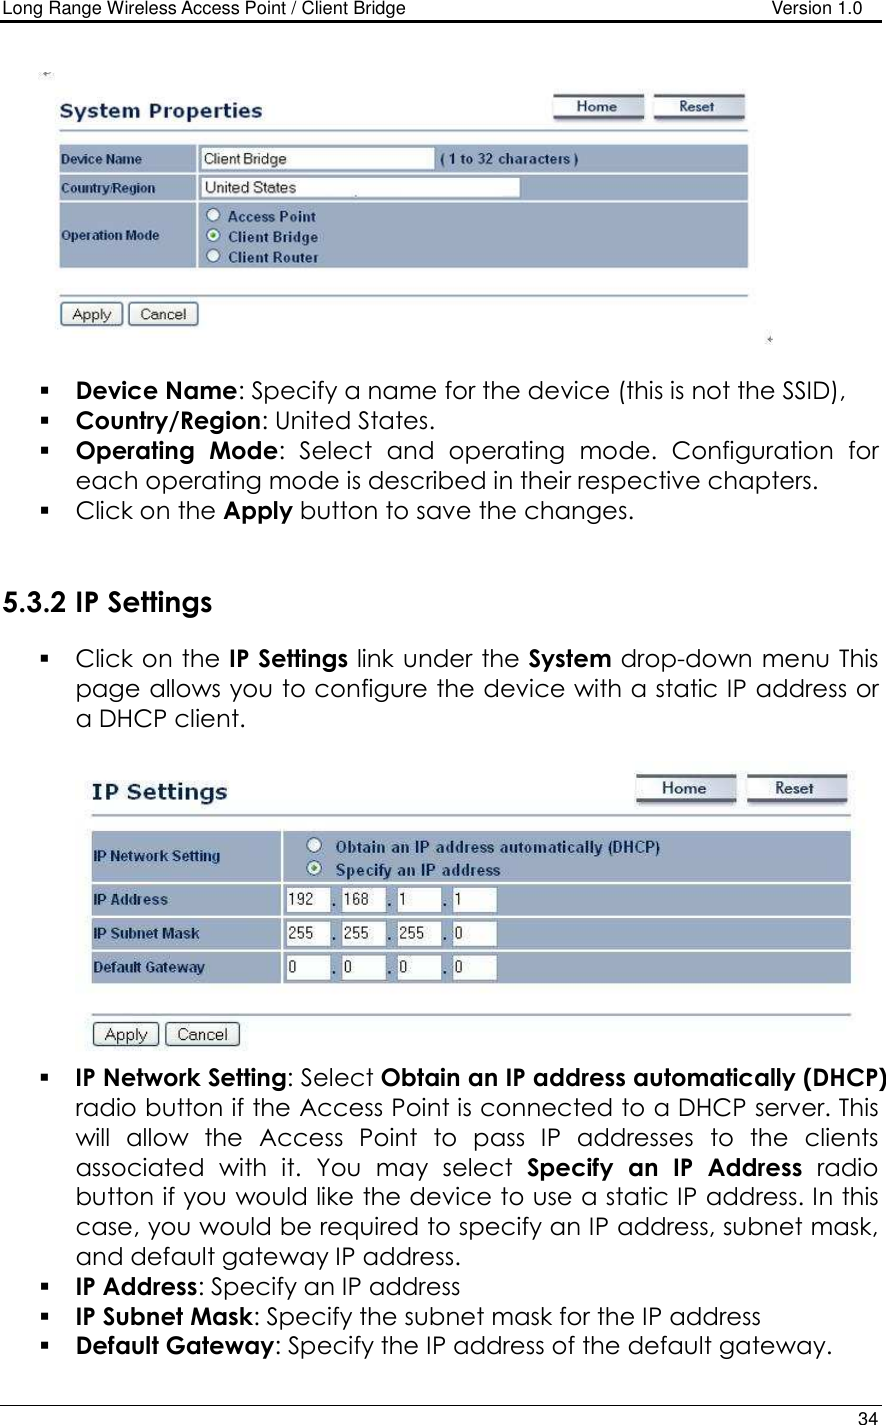 Long Range Wireless Access Point / Client Bridge                                   Version 1.0    34     Device Name: Specify a name for the device (this is not the SSID),  Country/Region: United States.  Operating  Mode:  Select  and  operating  mode.  Configuration  for each operating mode is described in their respective chapters.   Click on the Apply button to save the changes.    5.3.2 IP Settings  Click on the IP Settings link under the System drop-down menu This page allows you to configure the device with a static IP address or a DHCP client.      IP Network Setting: Select Obtain an IP address automatically (DHCP) radio button if the Access Point is connected to a DHCP server. This will  allow  the  Access  Point  to  pass  IP  addresses  to  the  clients associated  with  it.  You  may  select  Specify  an  IP  Address  radio button if you would like the device to use a static IP address. In this case, you would be required to specify an IP address, subnet mask, and default gateway IP address.  IP Address: Specify an IP address  IP Subnet Mask: Specify the subnet mask for the IP address  Default Gateway: Specify the IP address of the default gateway. 